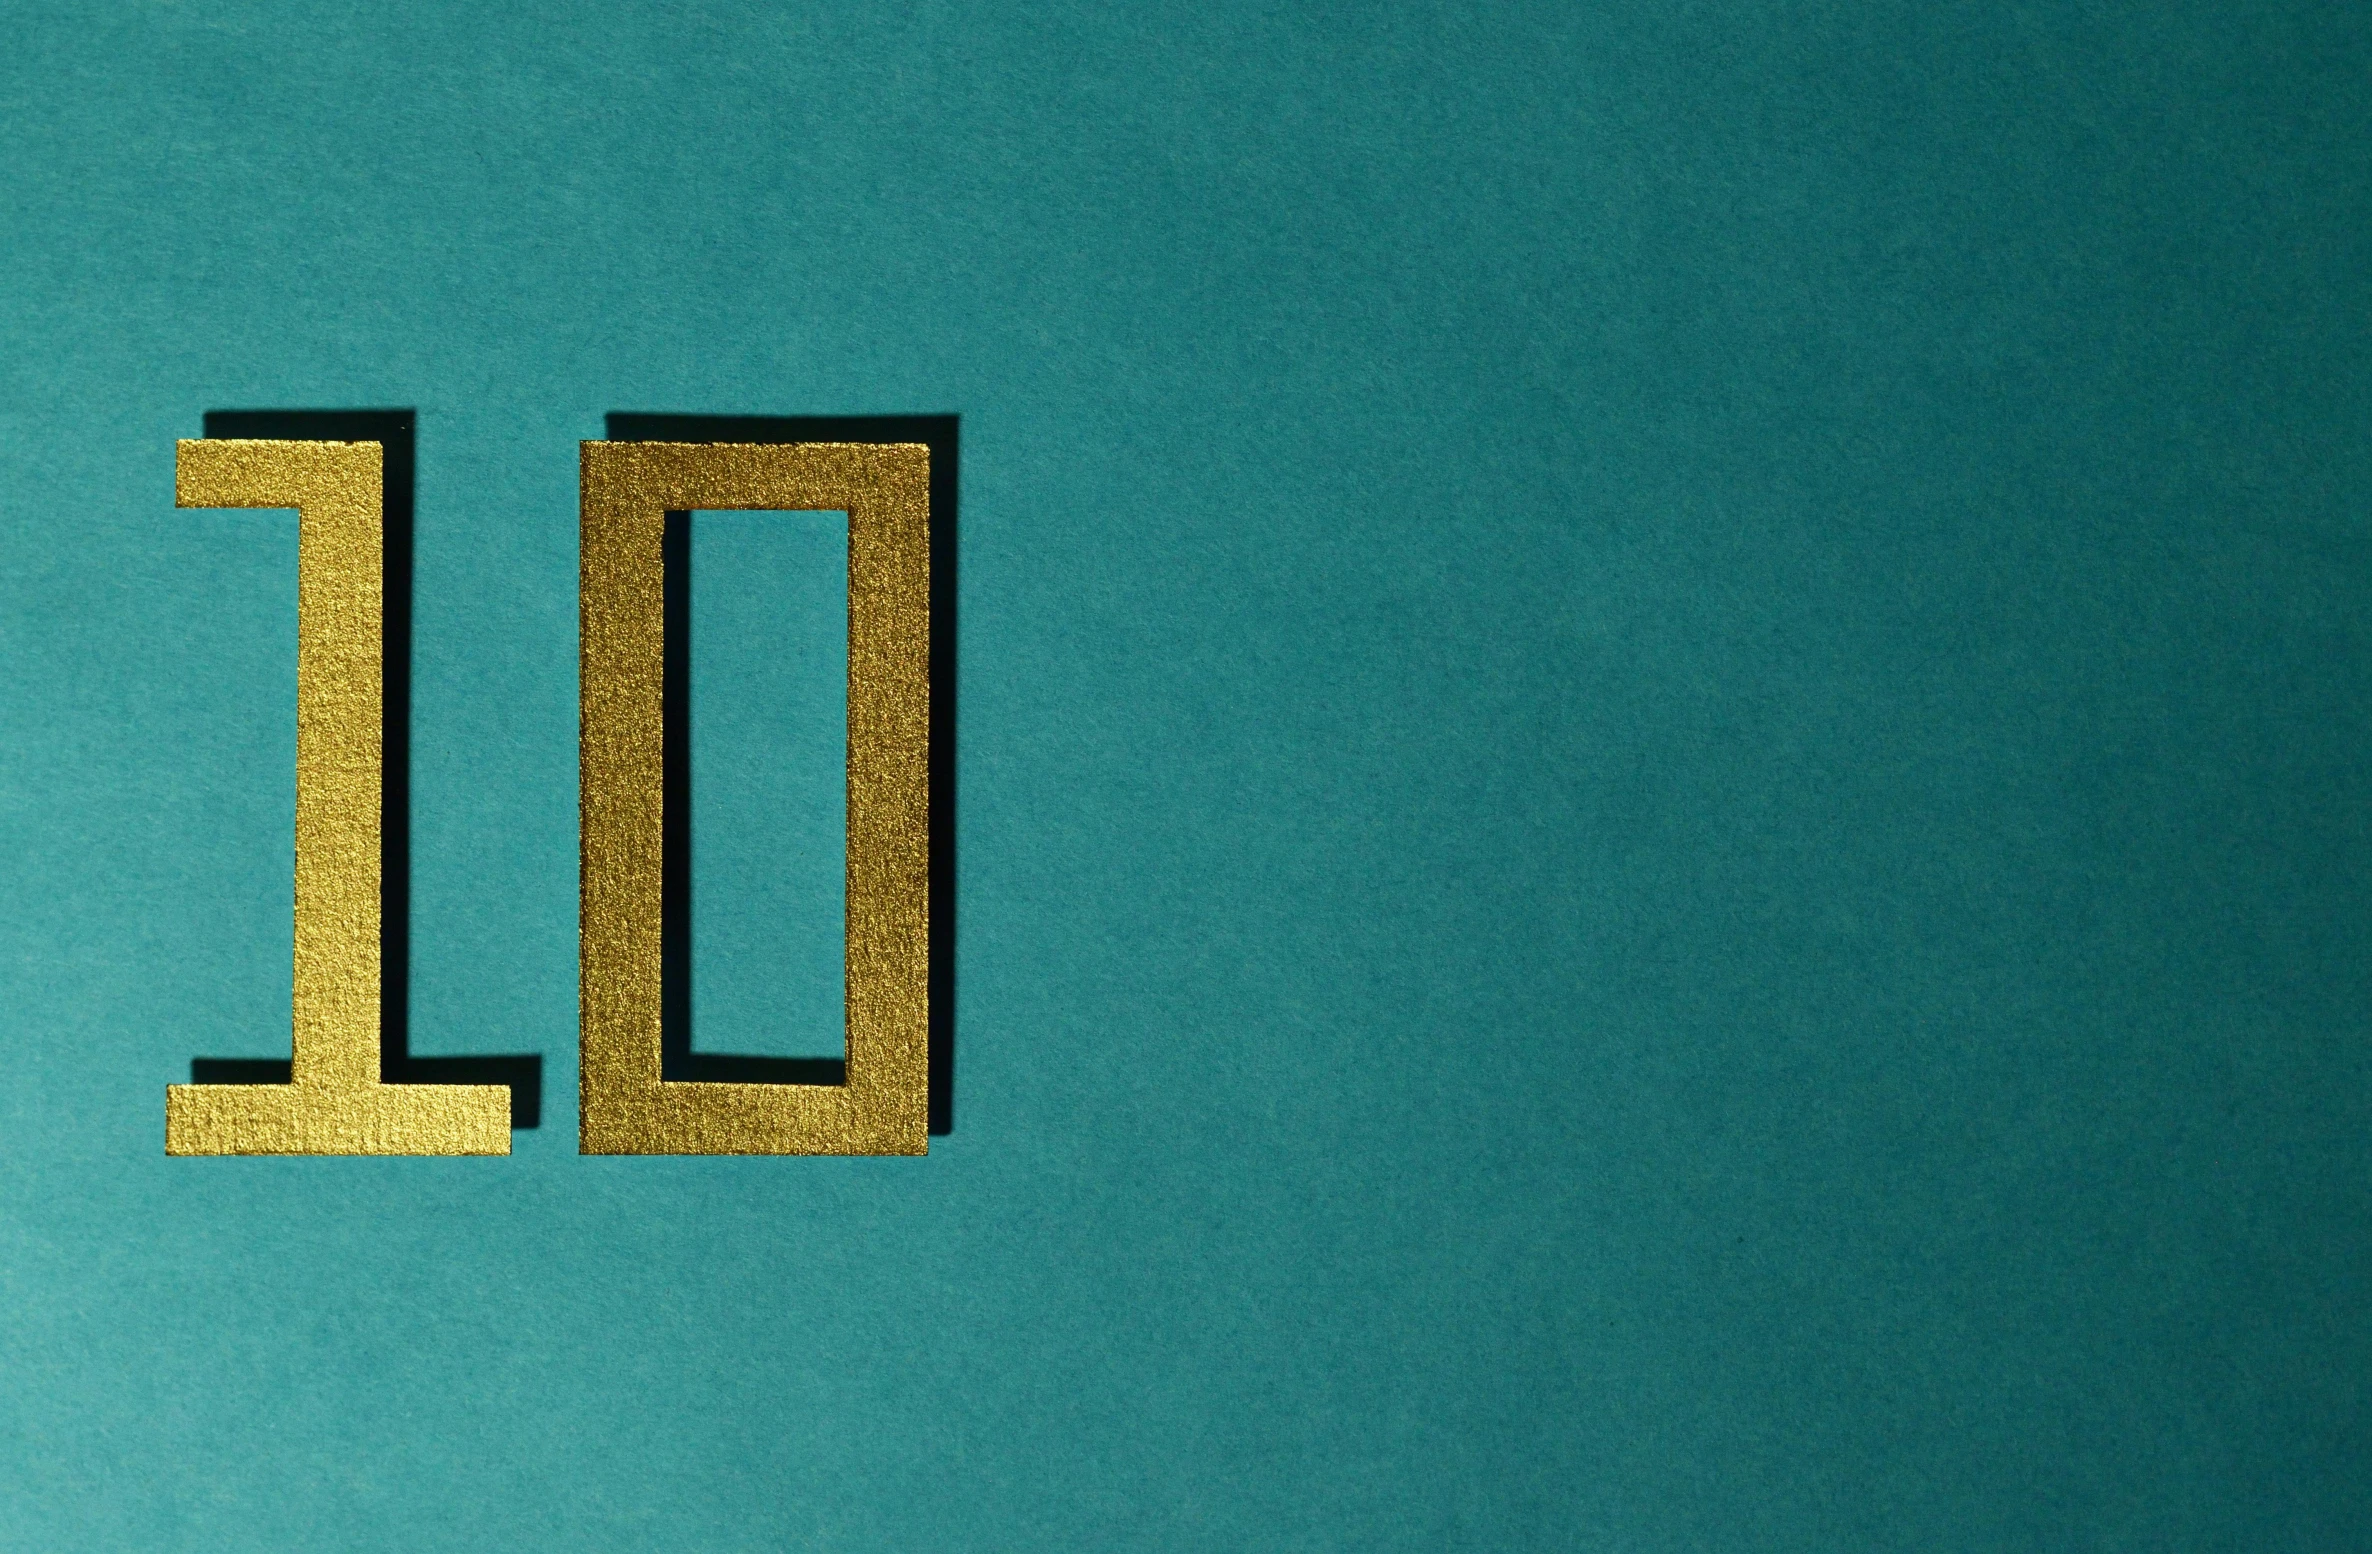 a close up of a number on a blue surface, an album cover, inspired by Zsolt Bodoni, trending on unsplash, international typographic style, gold and teal color scheme, yolo, hello, no - text no - logo